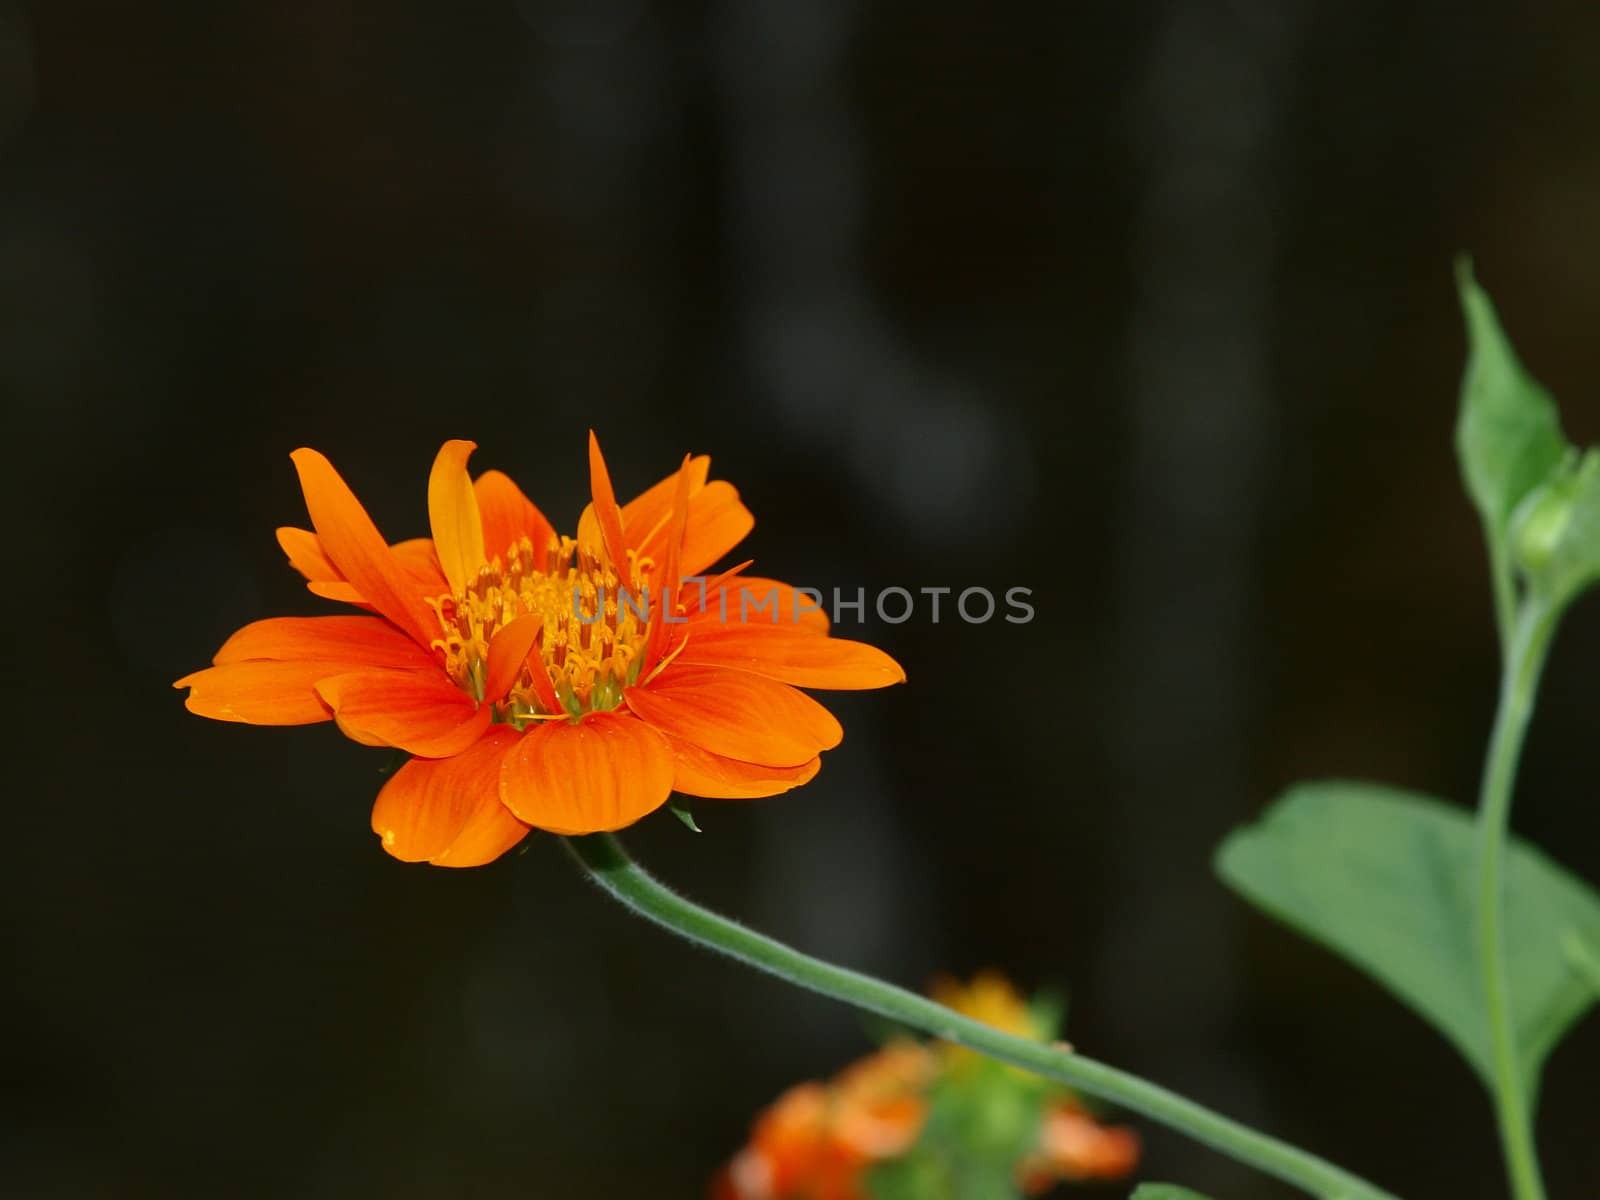 A close up of a Mexican Sunflower